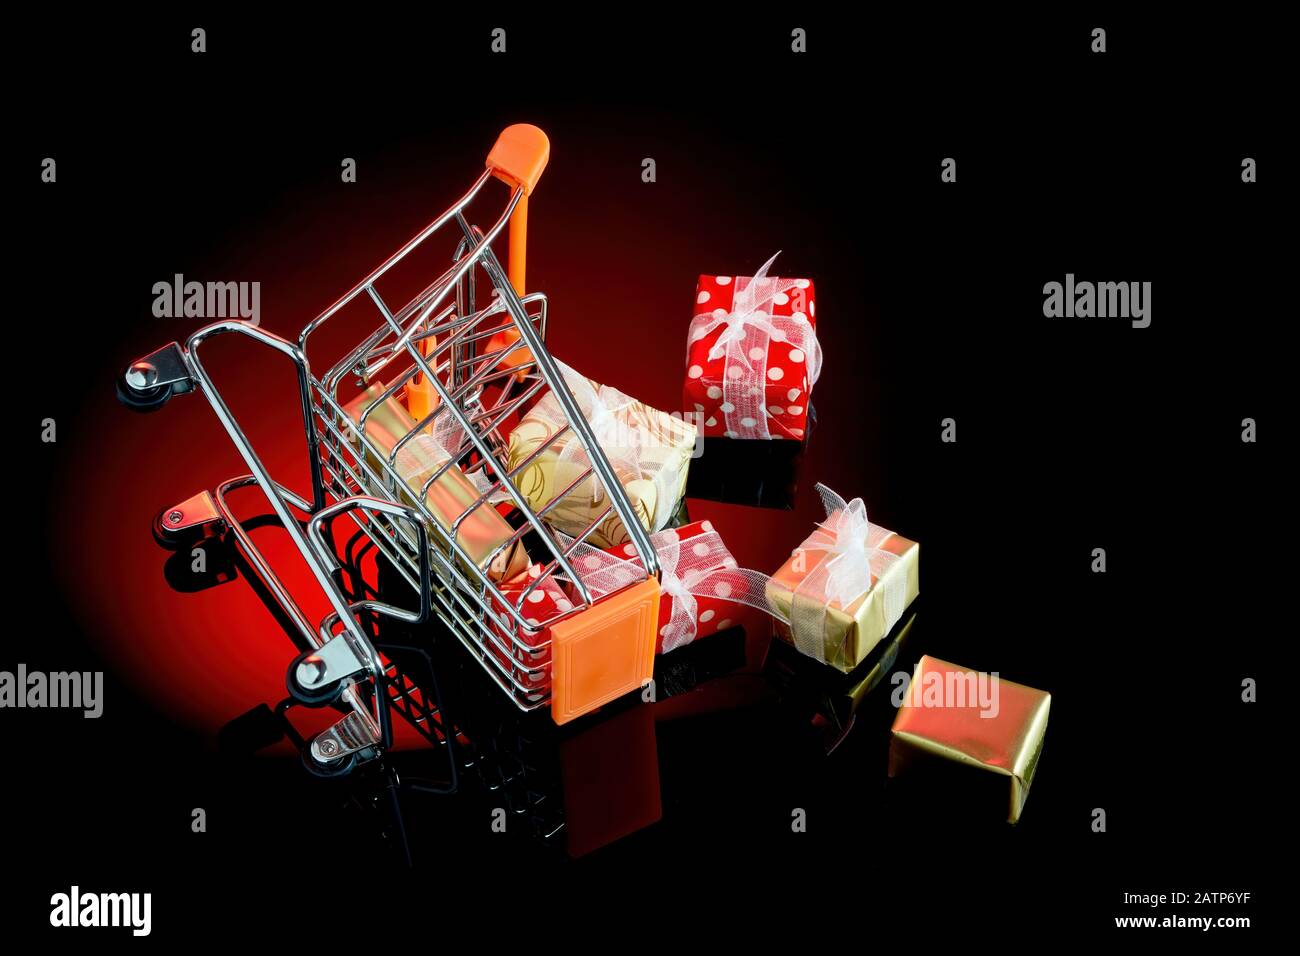 Toppled shopping cart with gift boxes spilled all over the floor with copy space. Concept of consumerism and compulsive spending or buying disorder. Stock Photo